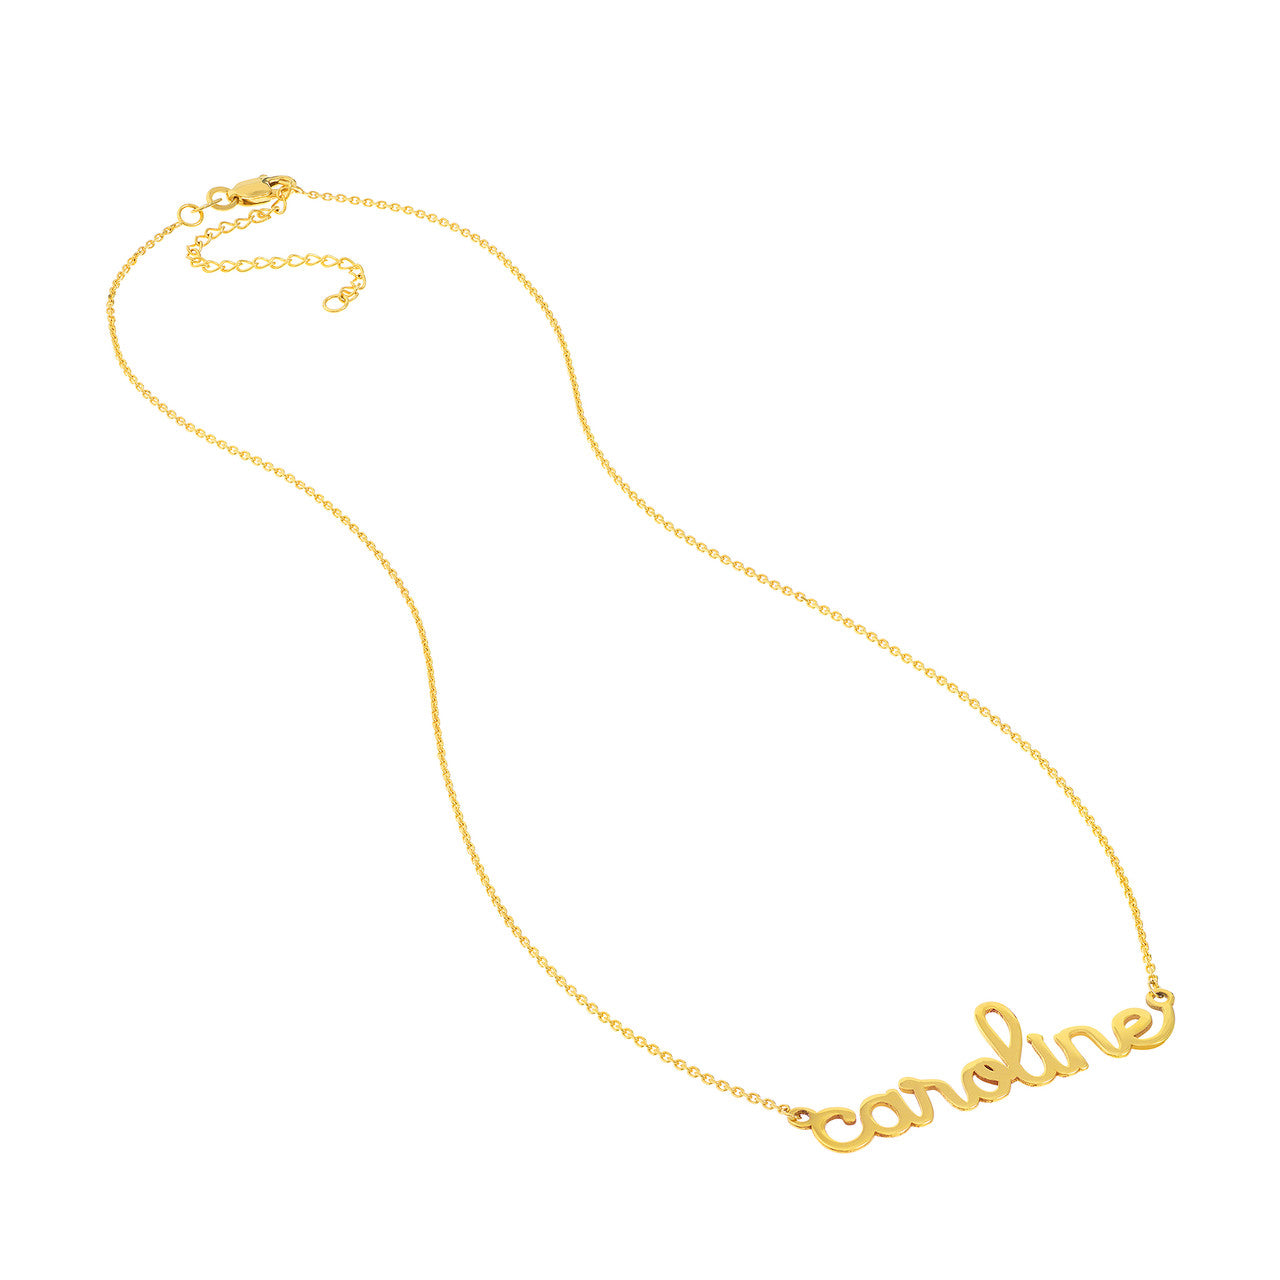 Personalized Script Name Necklace in 14k Yellow Gold